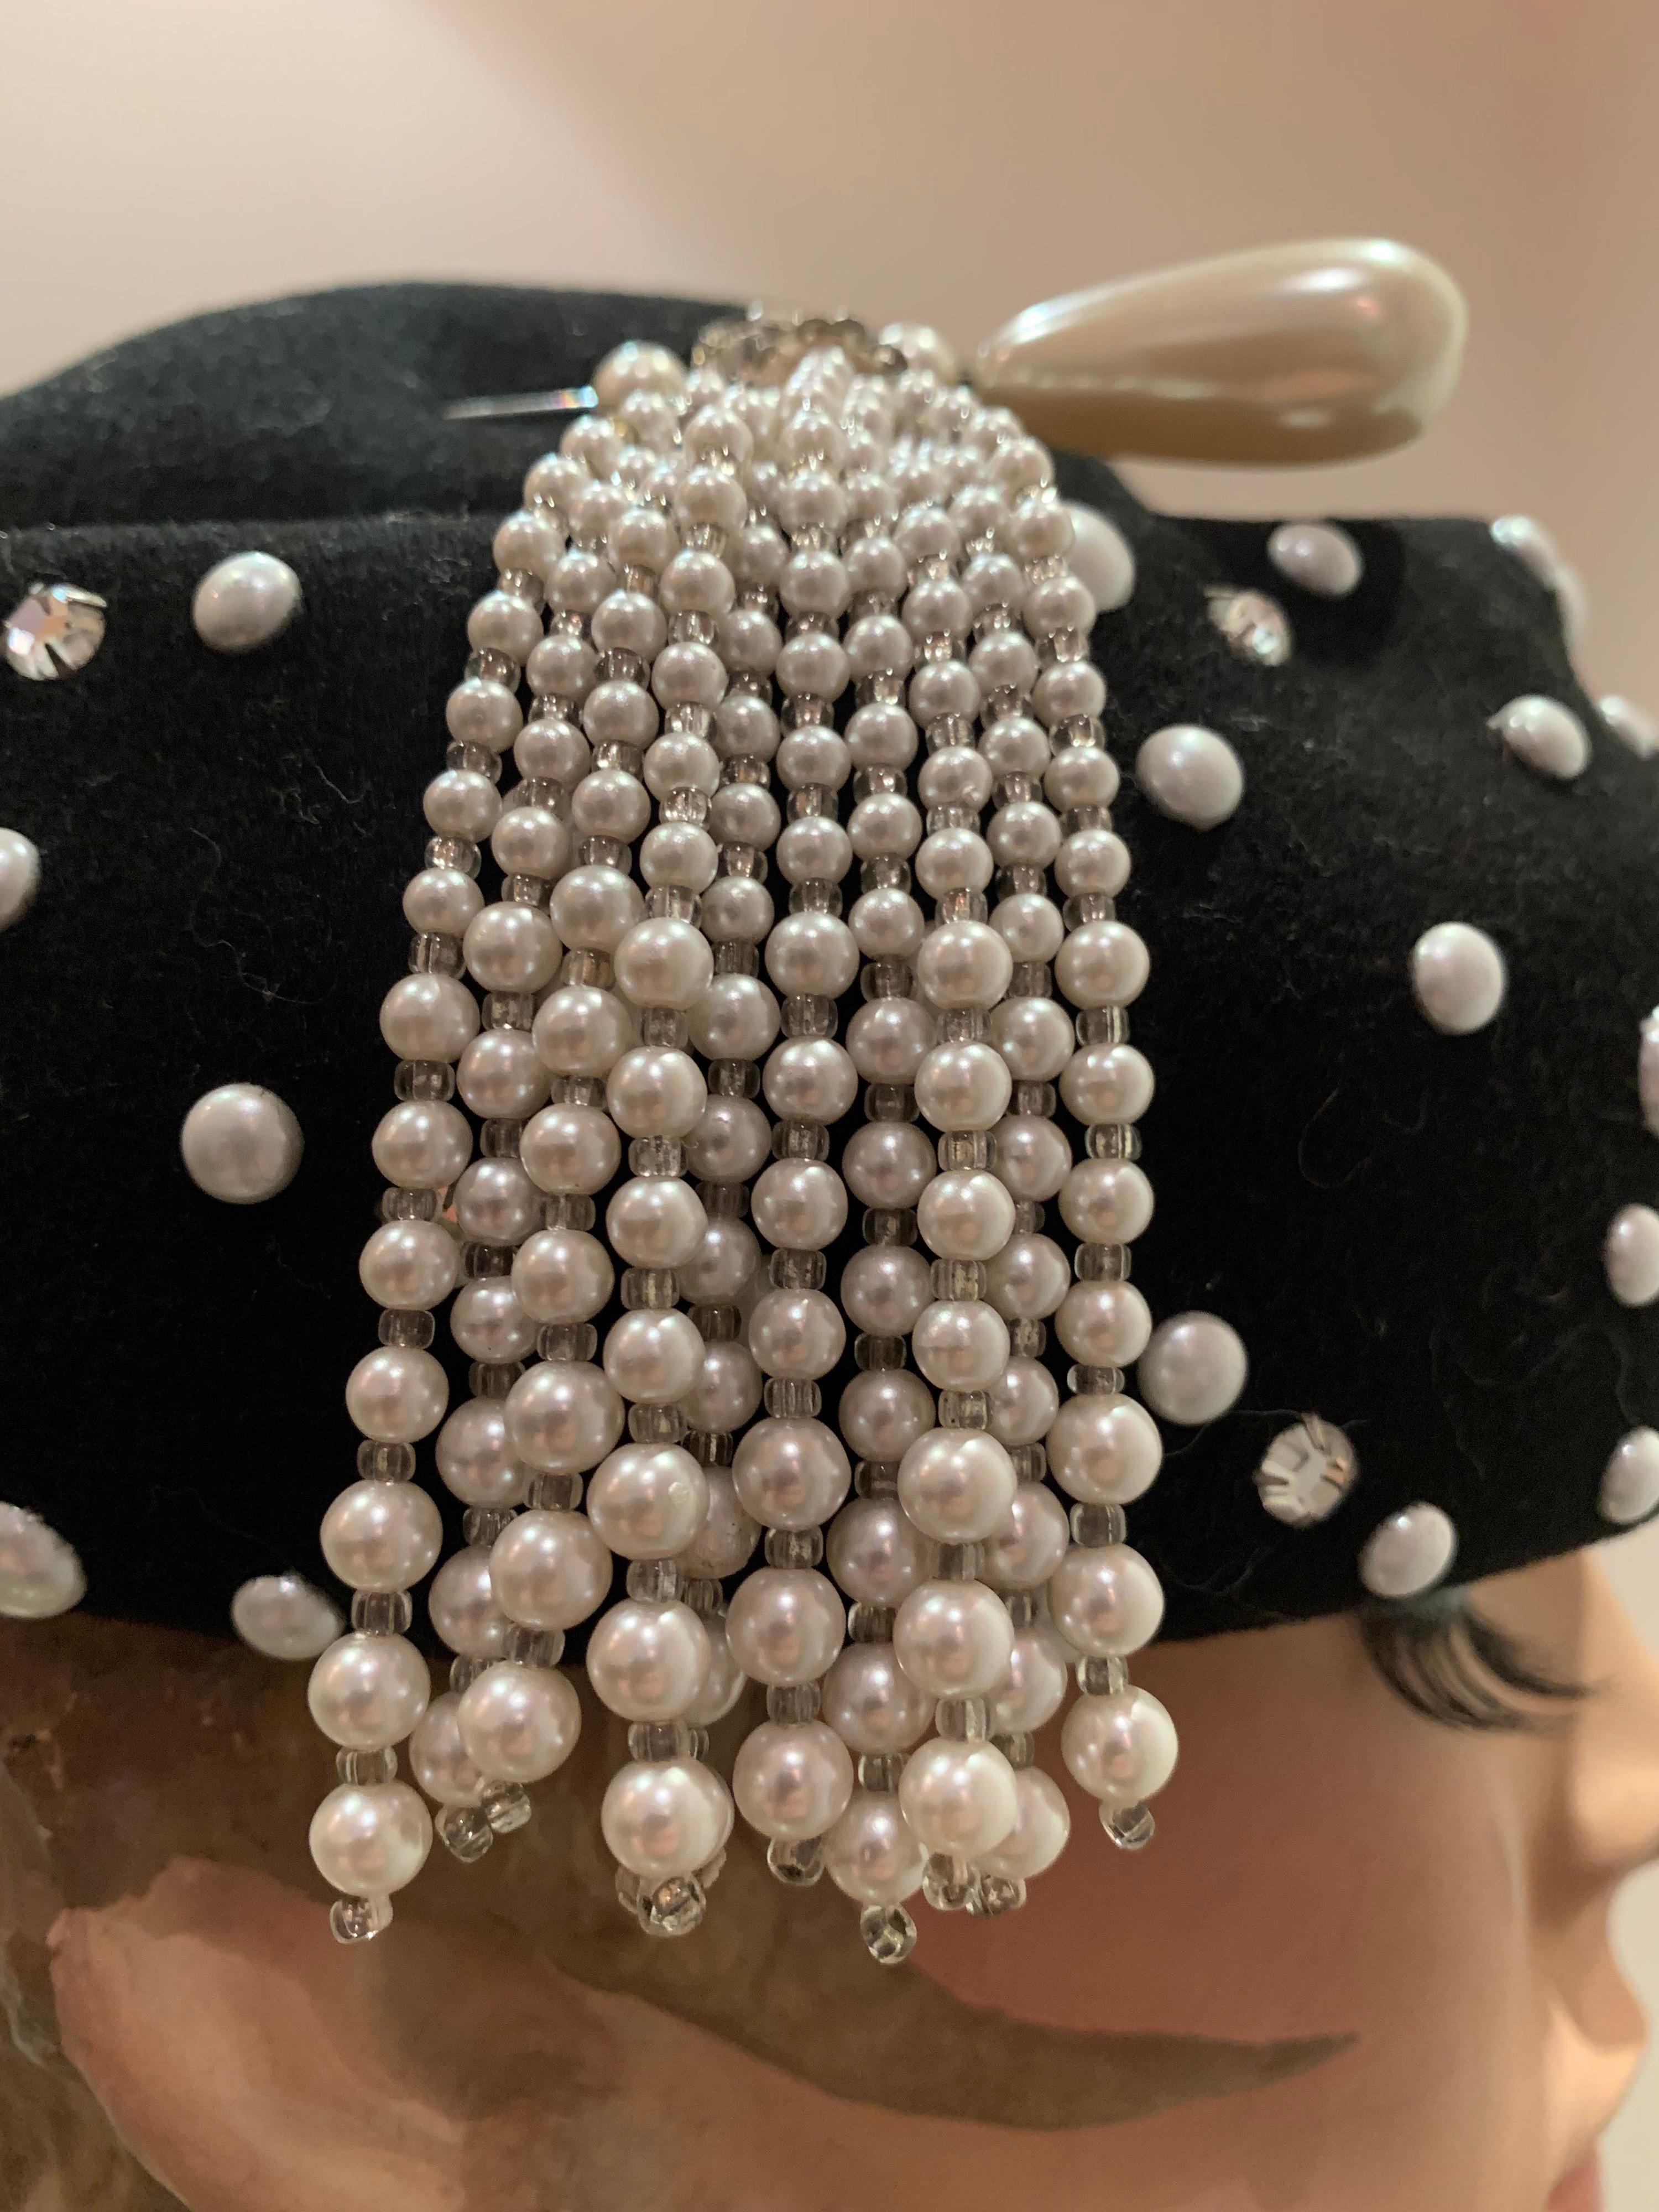 A 1960s Adolfo II black wool felt molded hat studded with faux pearls and rhinestones.  Original matching pearl tasseled hat pin included.